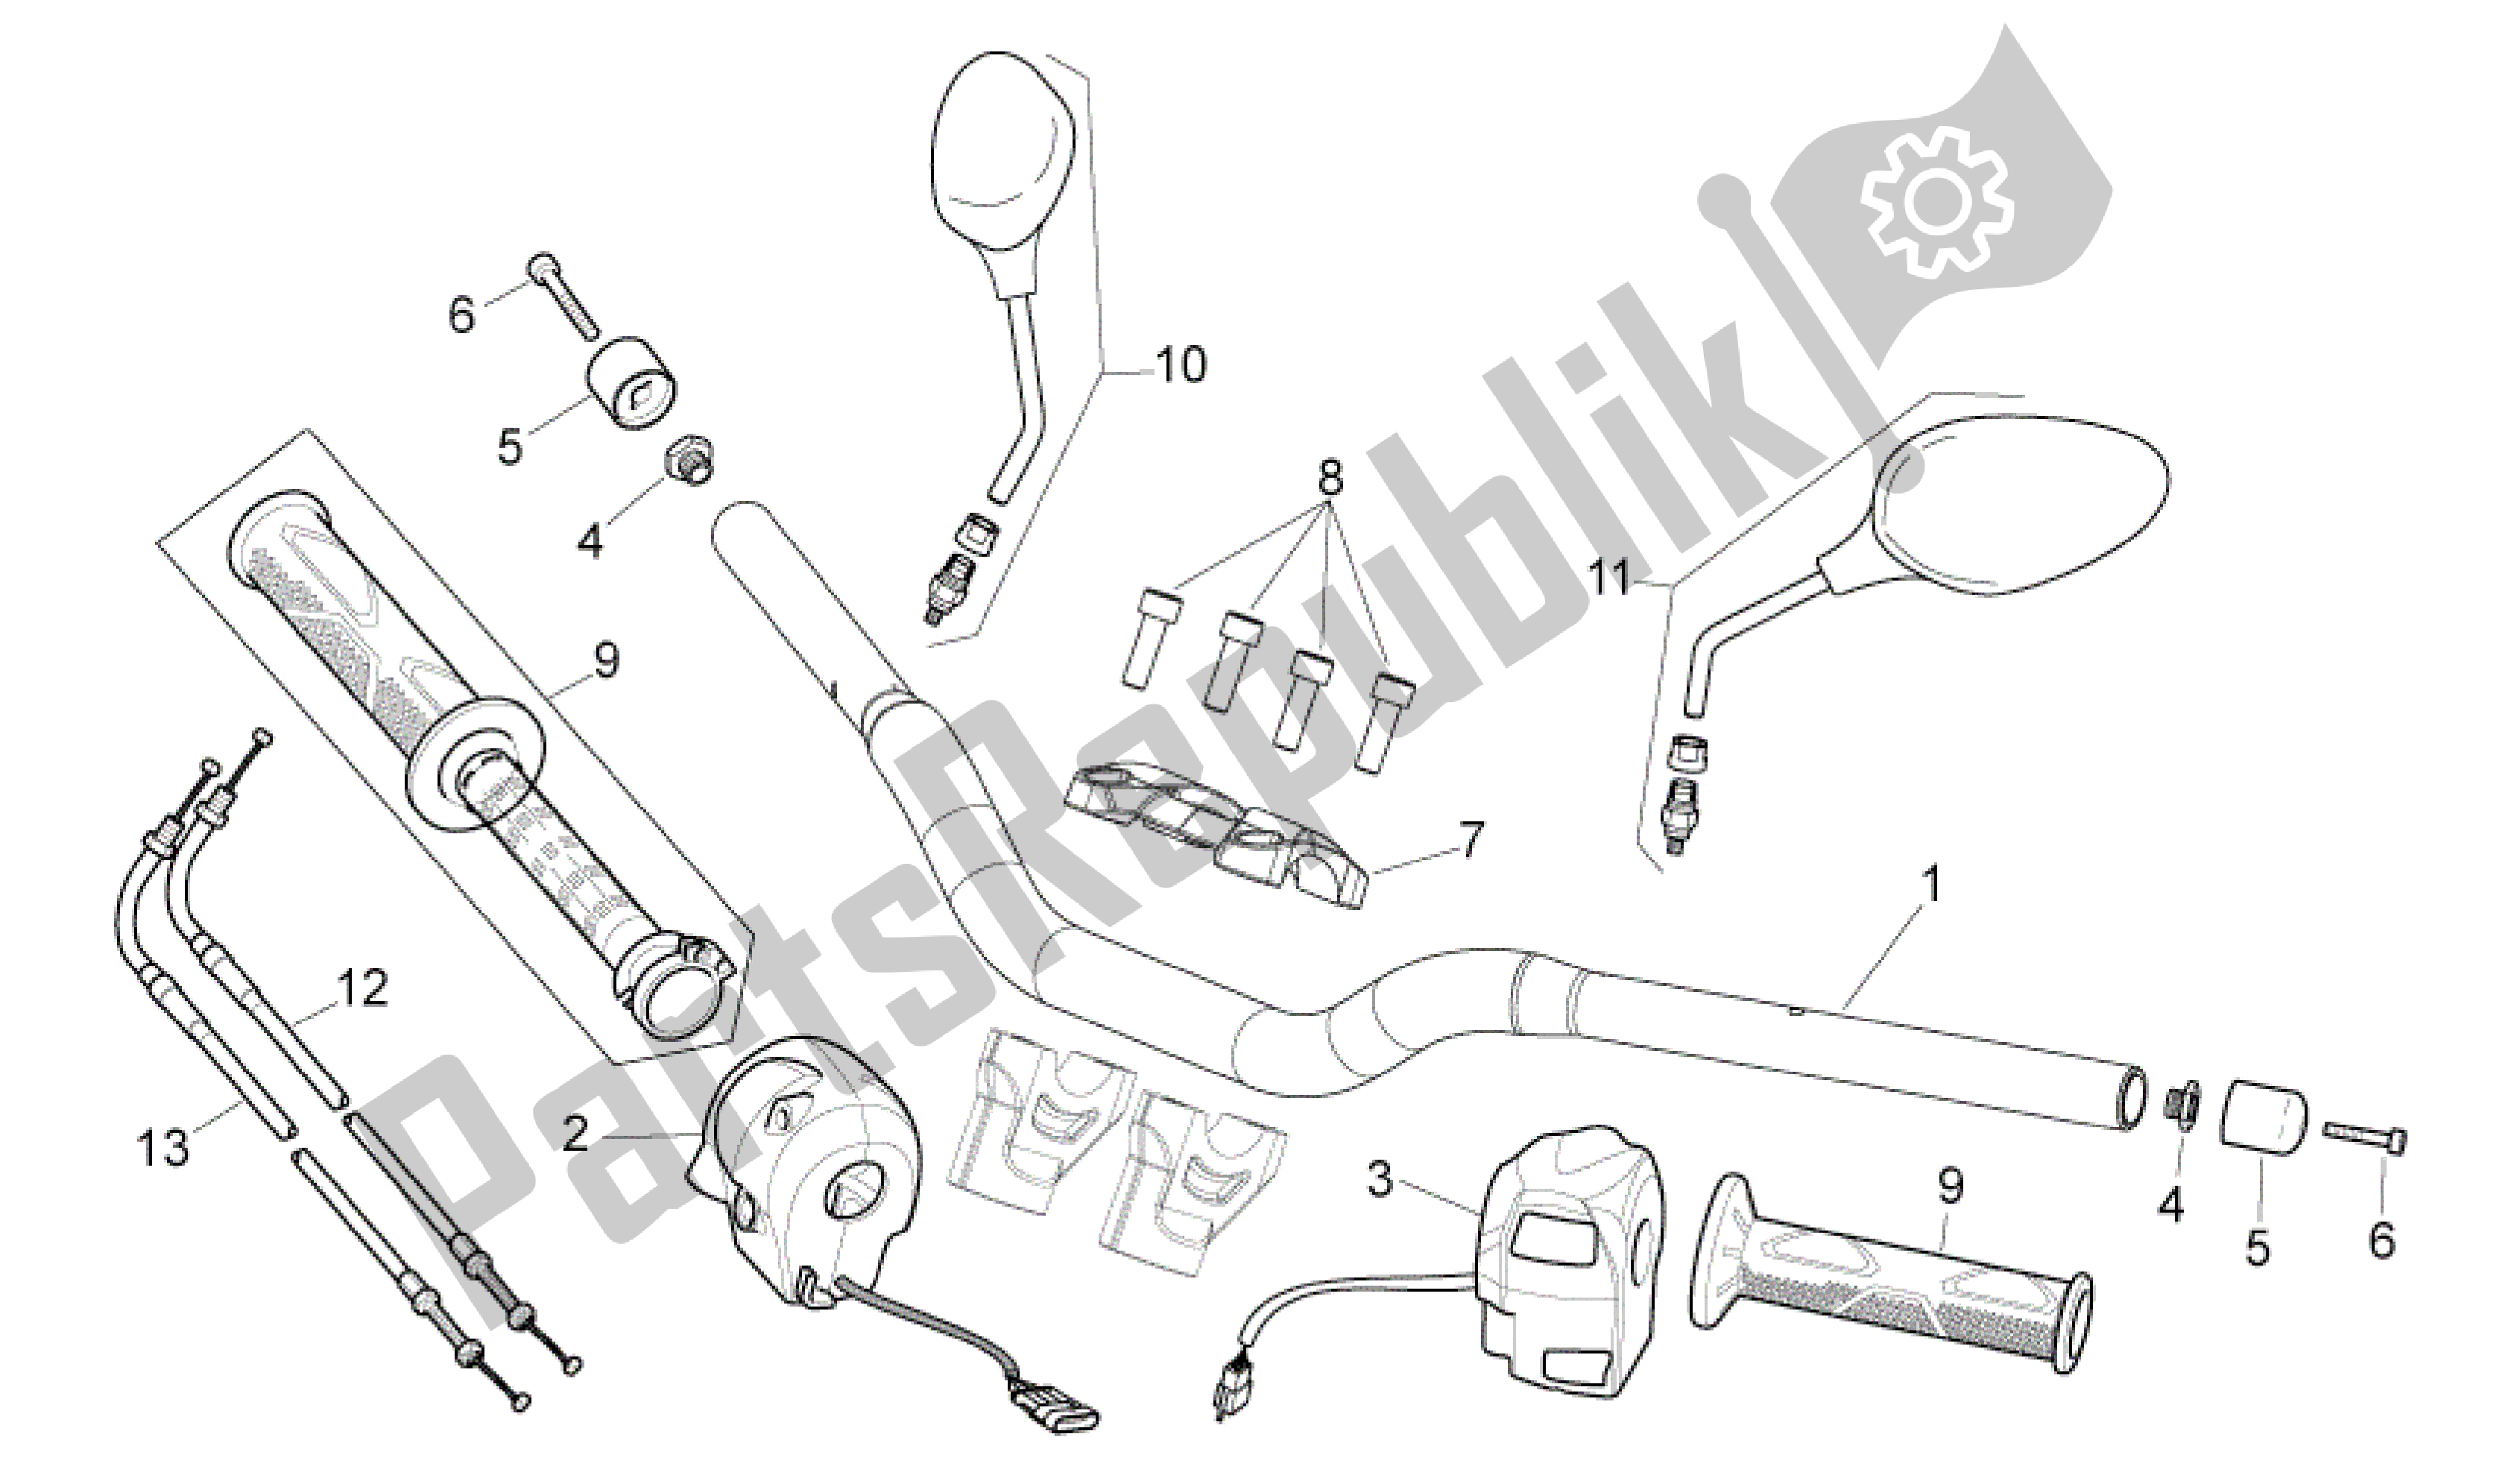 All parts for the Handlebar - Controls of the Aprilia Shiver 750 2007 - 2009